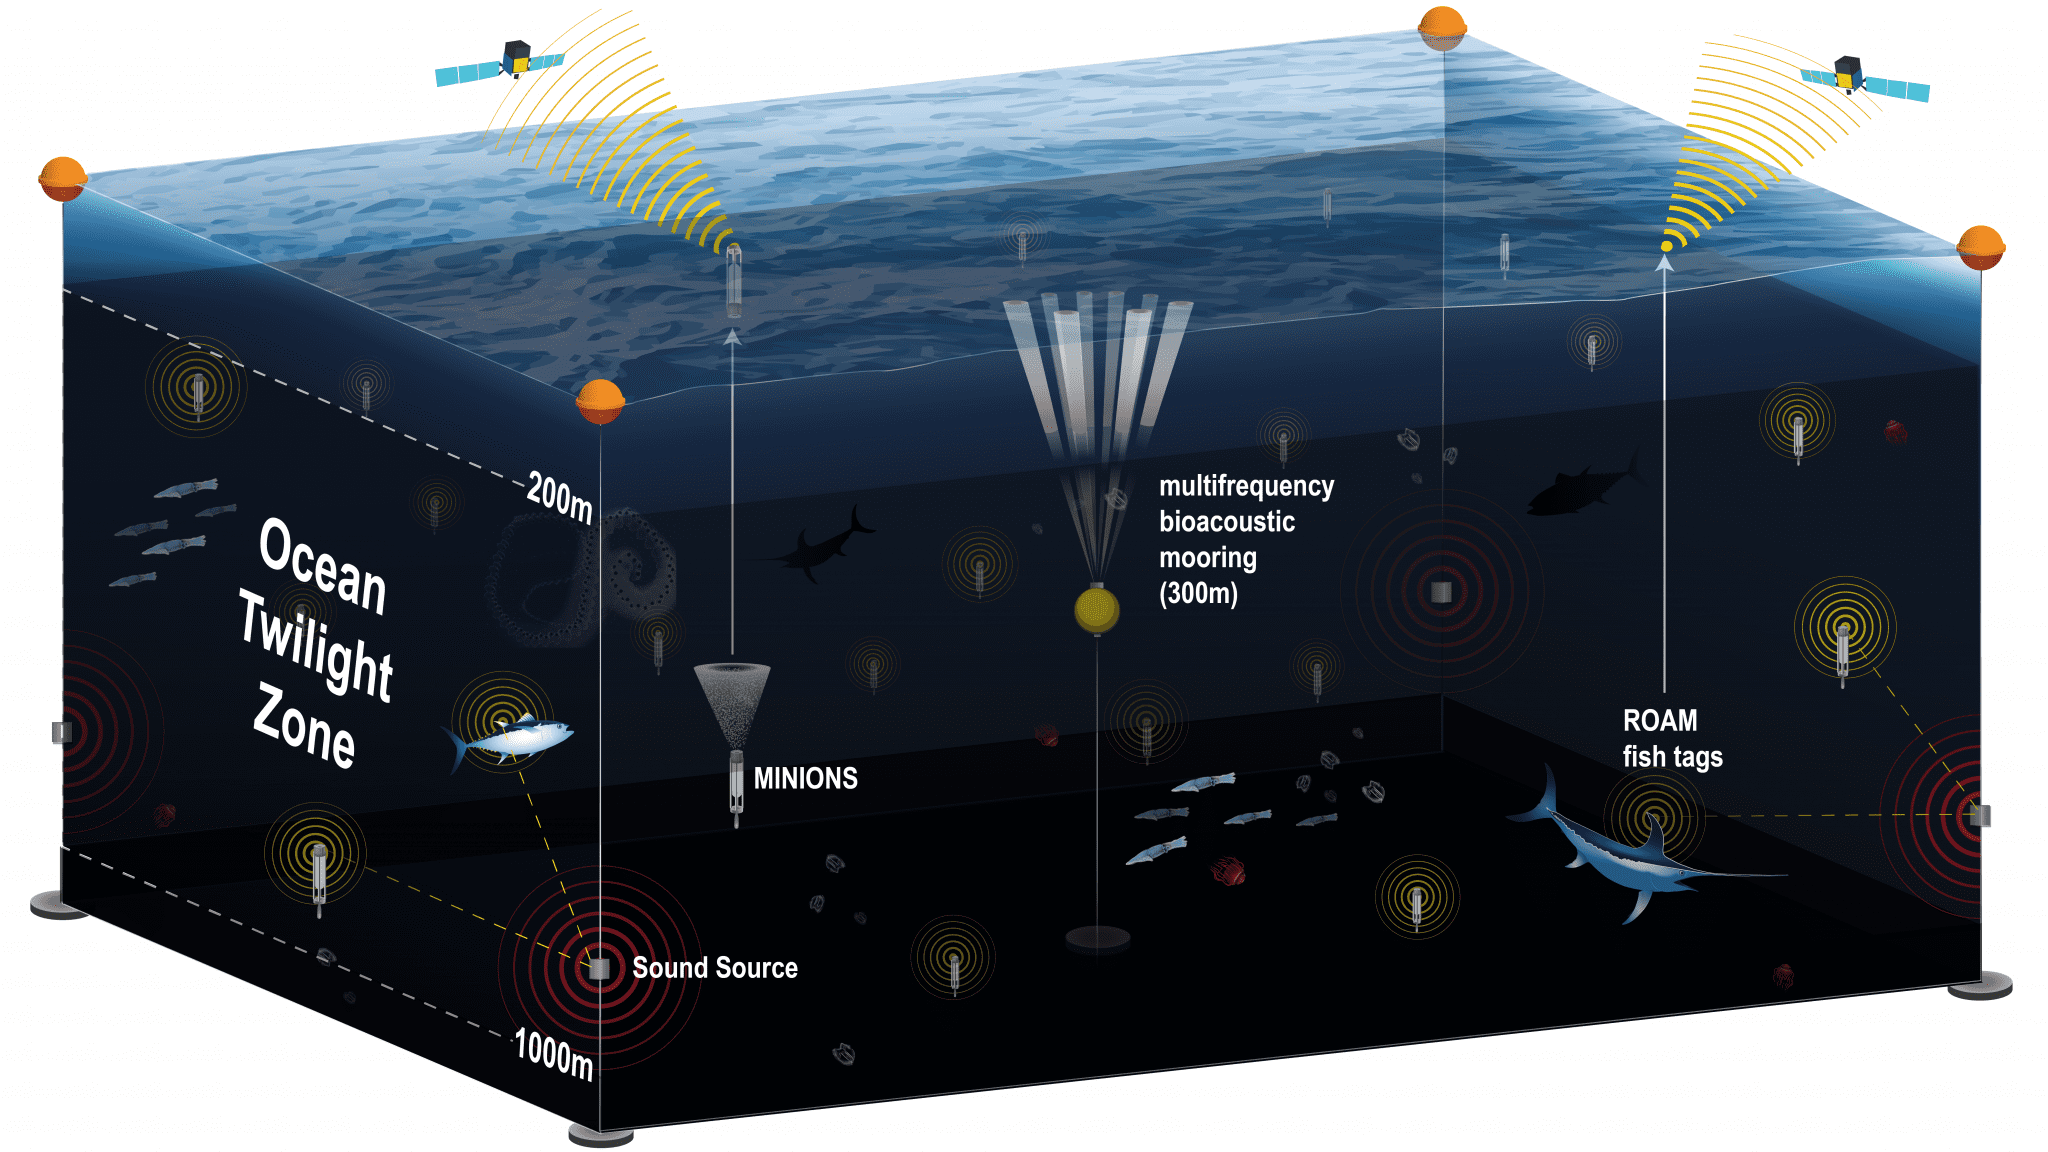 Scientists Are Developing A New Observation Network For The Ocean’s ‘Twilight Zone’